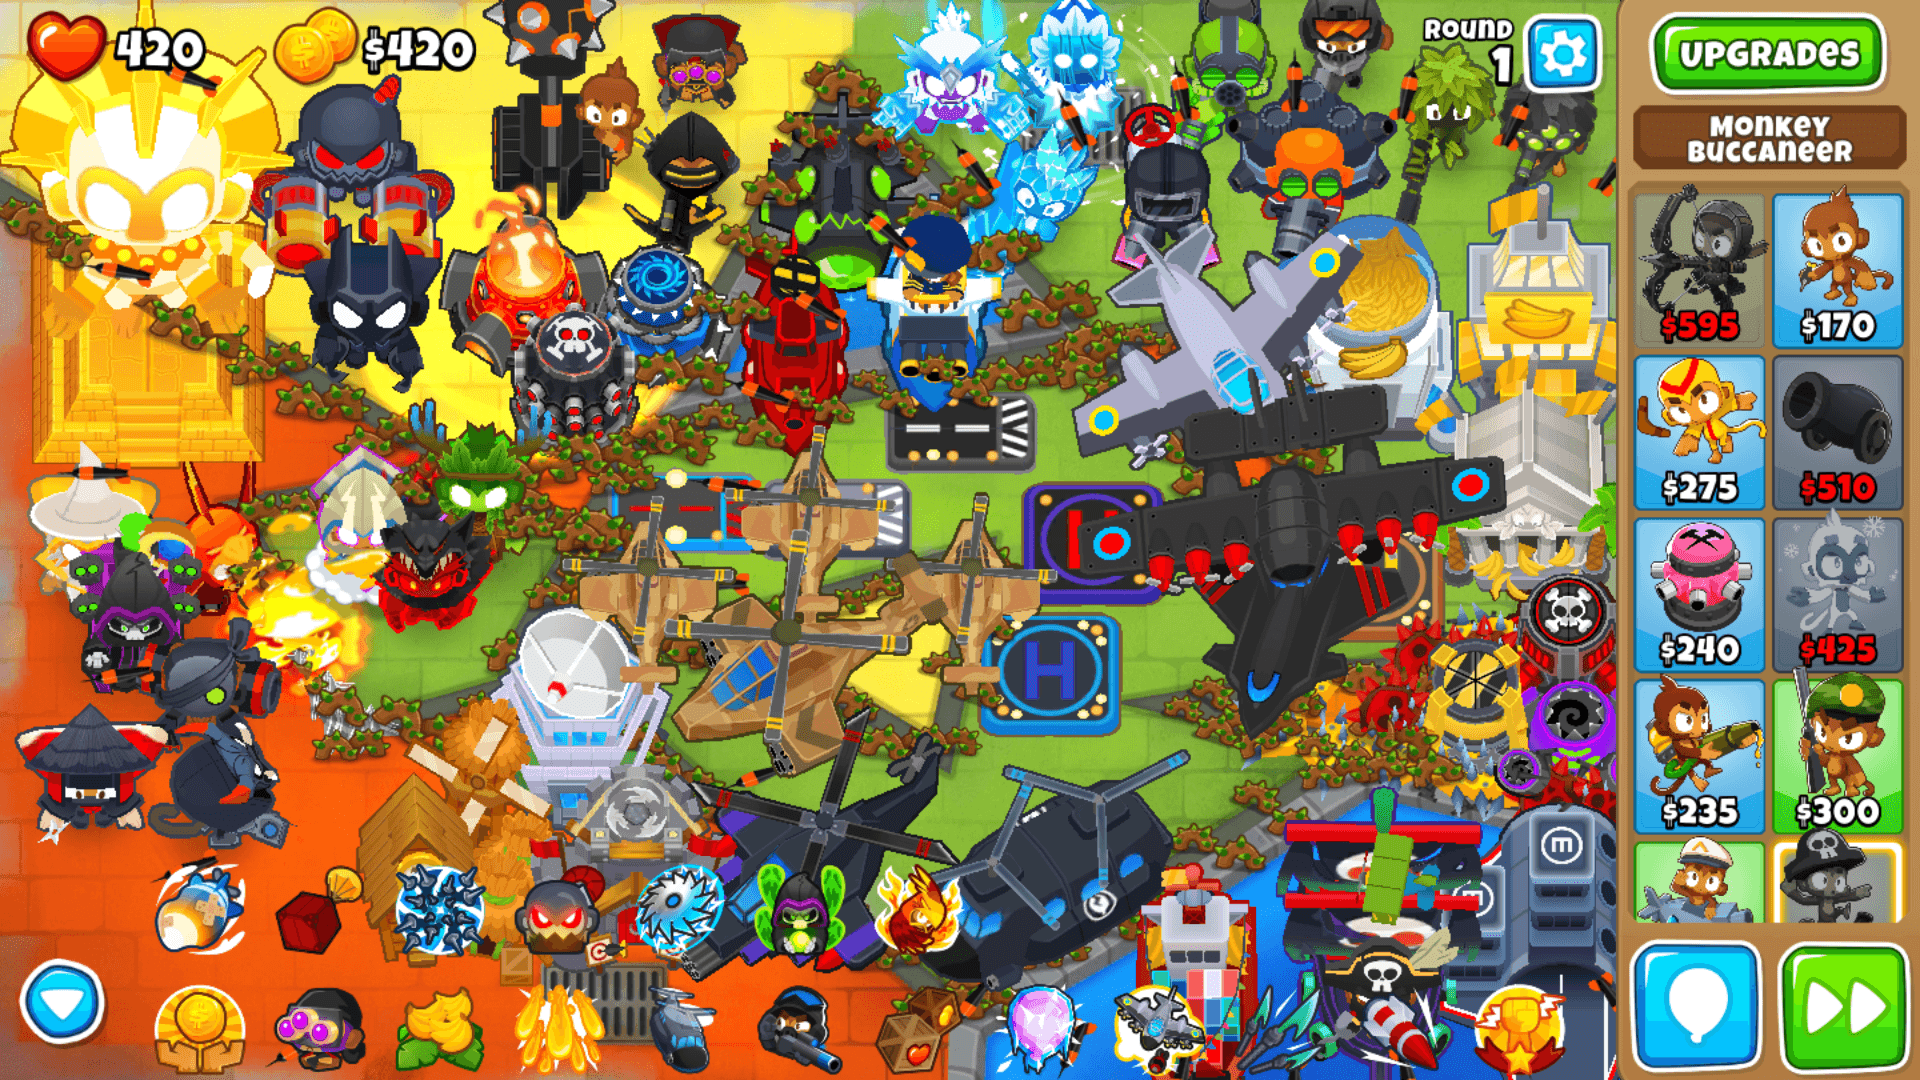 bloons tower defense 5 highest round